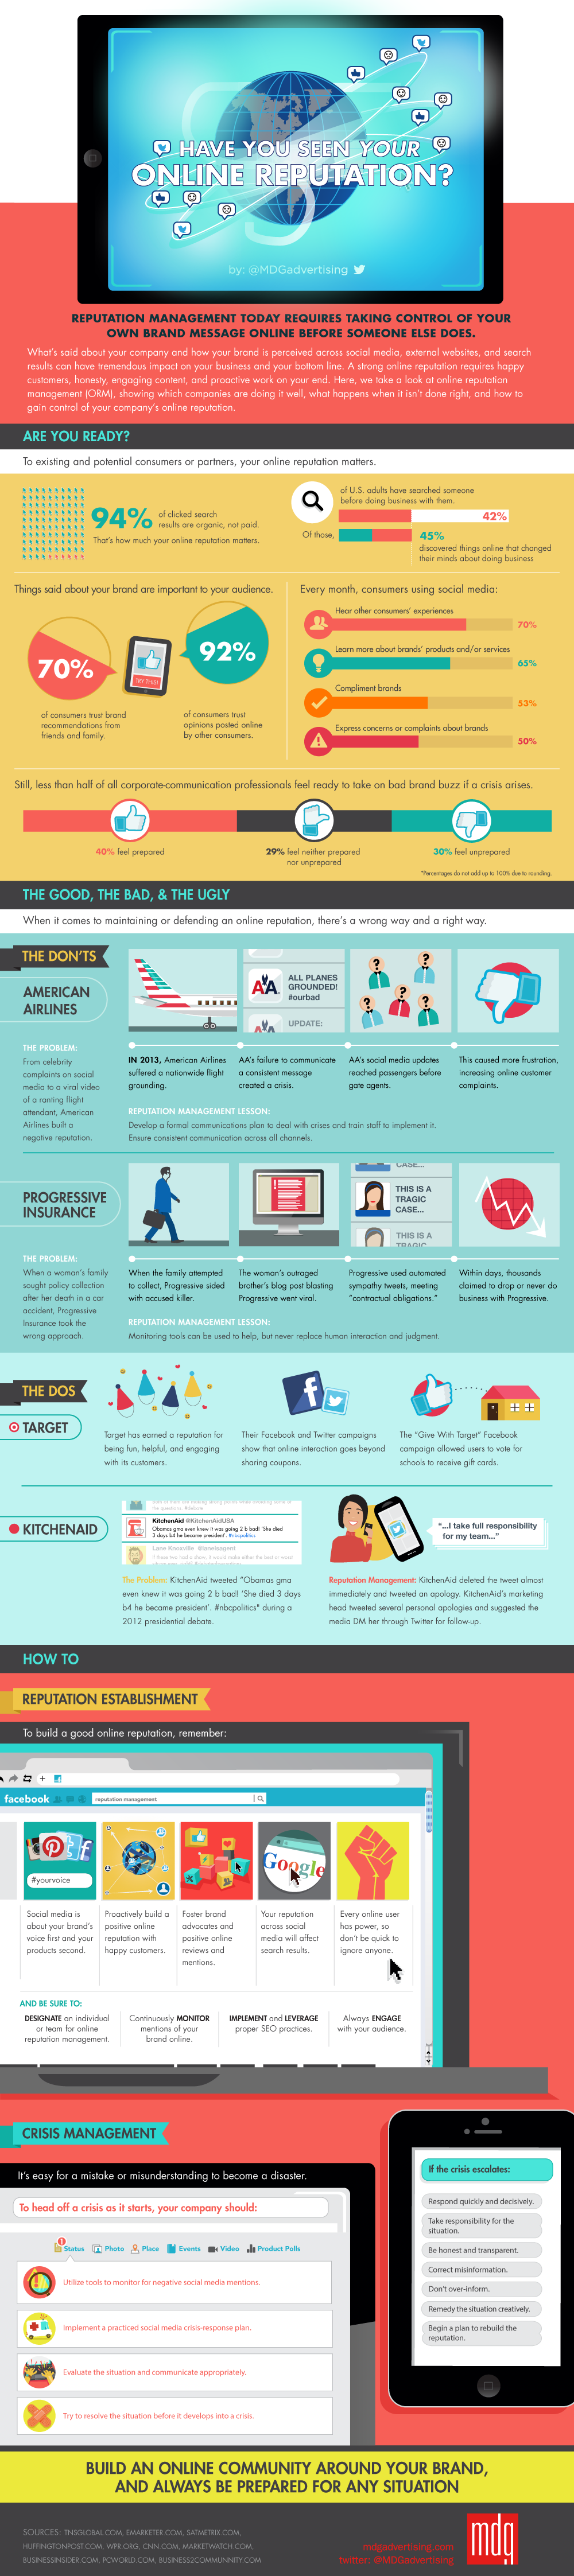 Have You Seen Your Online Reputation? [Infographic]